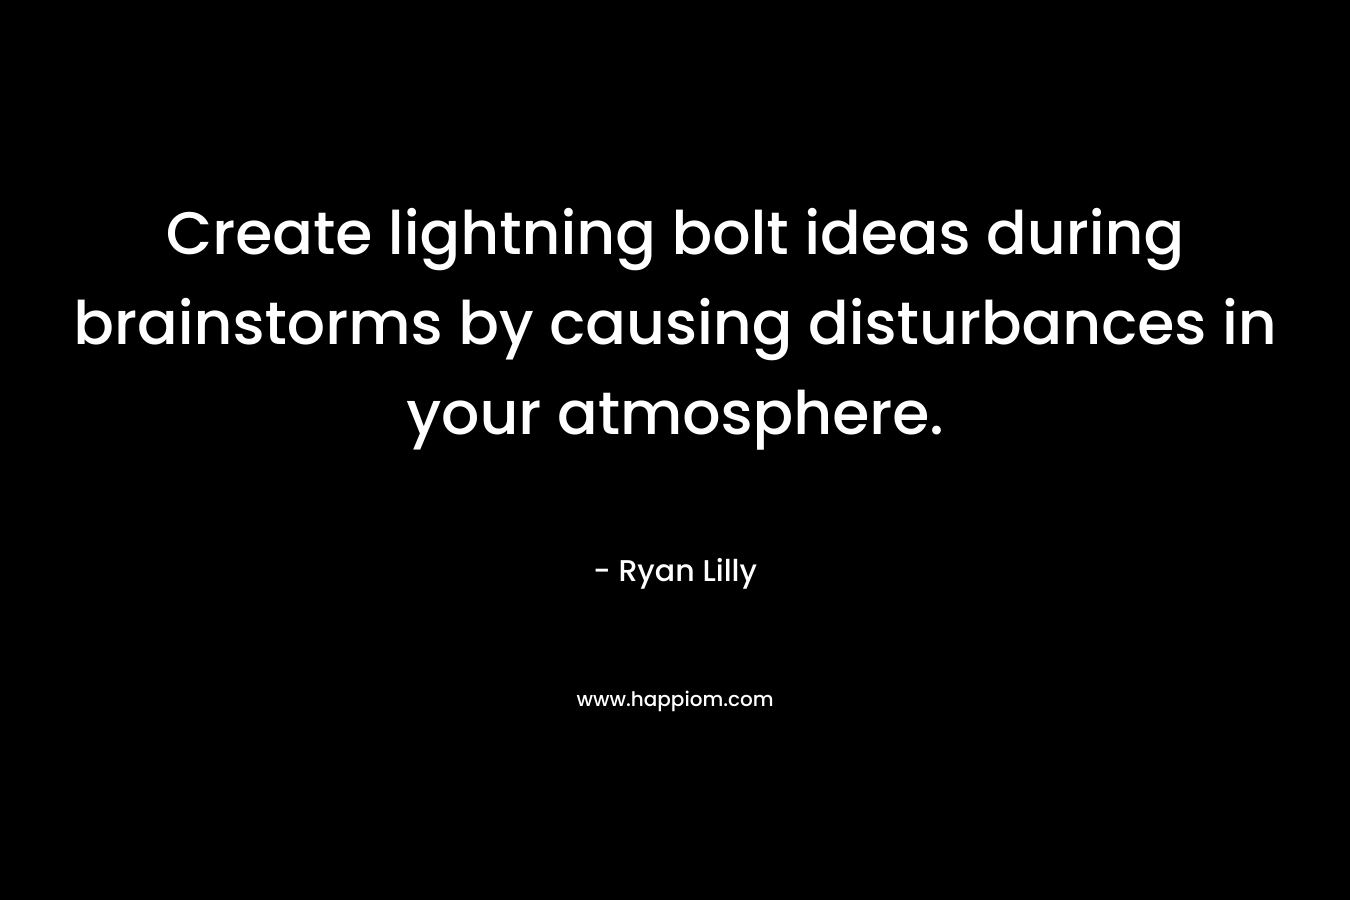 Create lightning bolt ideas during brainstorms by causing disturbances in your atmosphere.